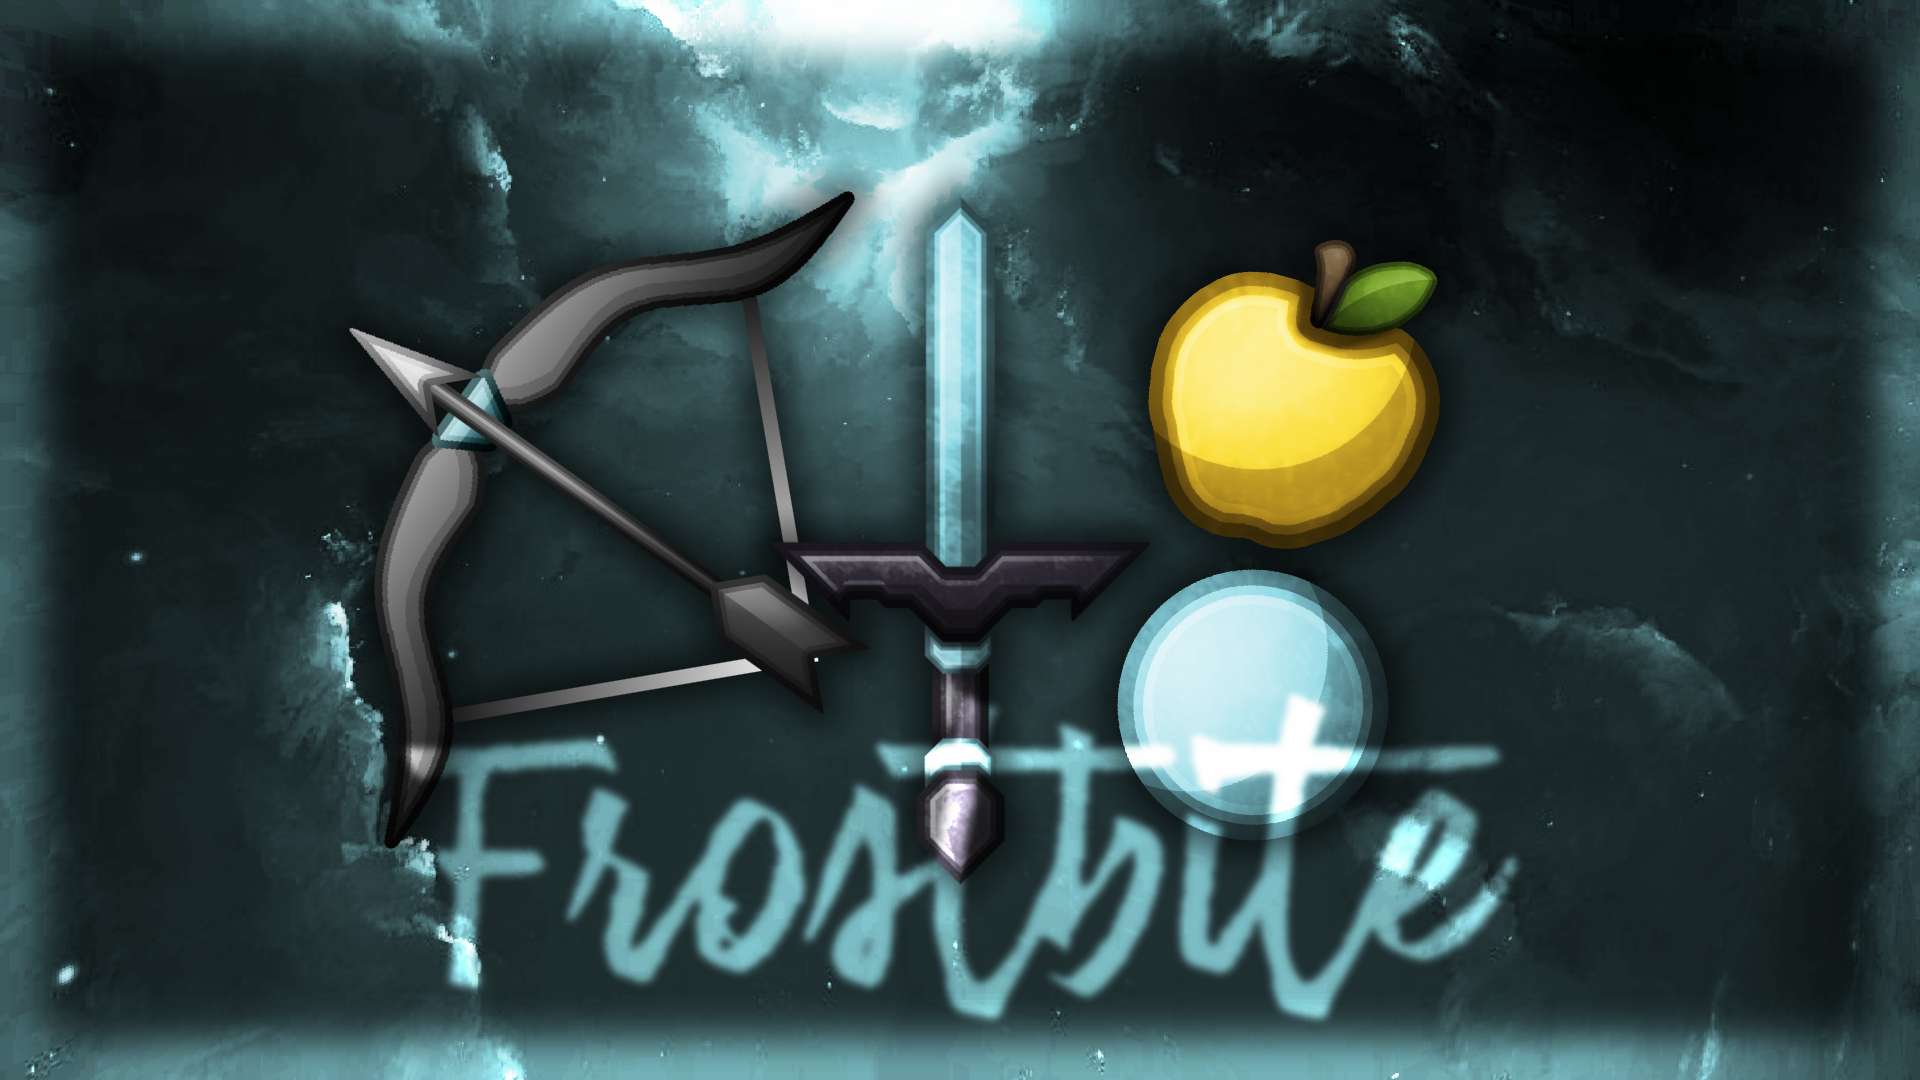 Frostbite (collab w/ Syno) 512x by Zlax on PvPRP